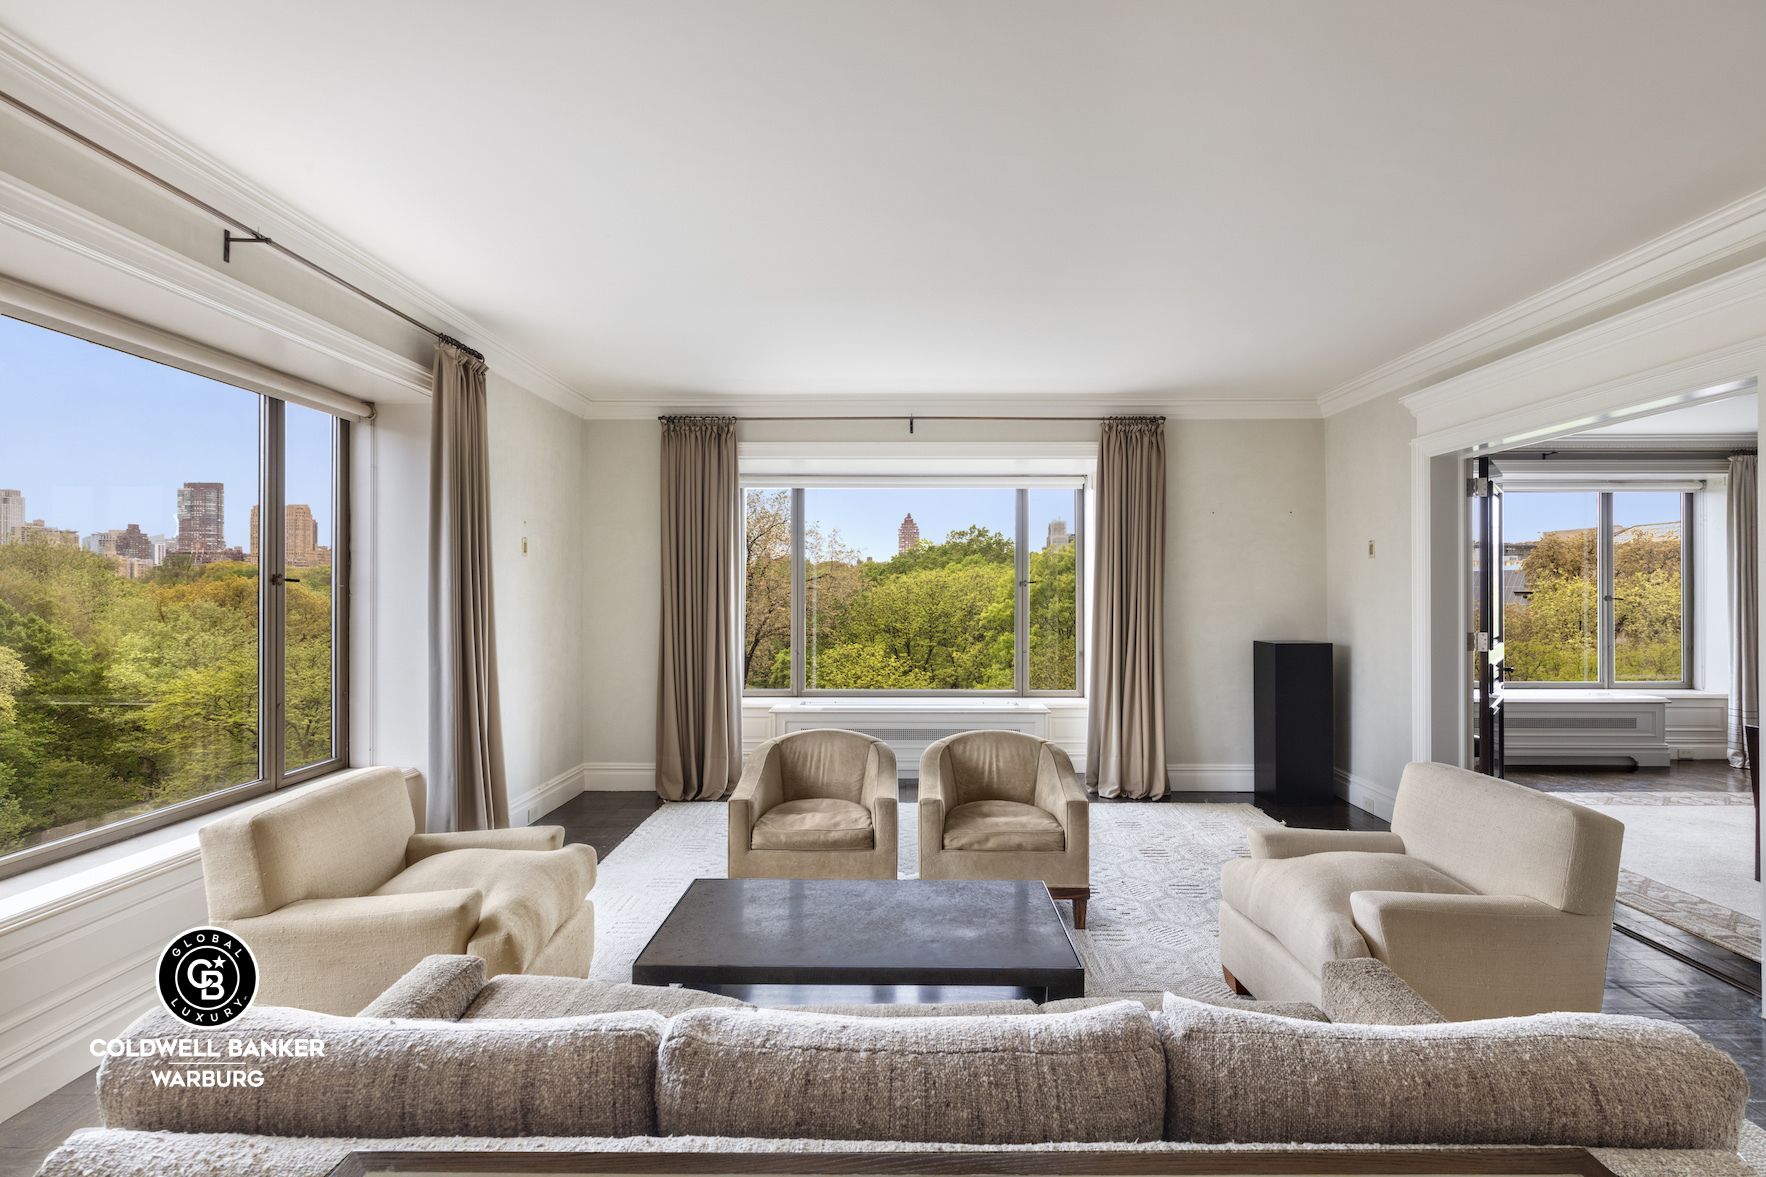 980 Fifth Avenue 8A, Upper East Side, Upper East Side, NYC - 3 Bedrooms  
3.5 Bathrooms  
7 Rooms - 